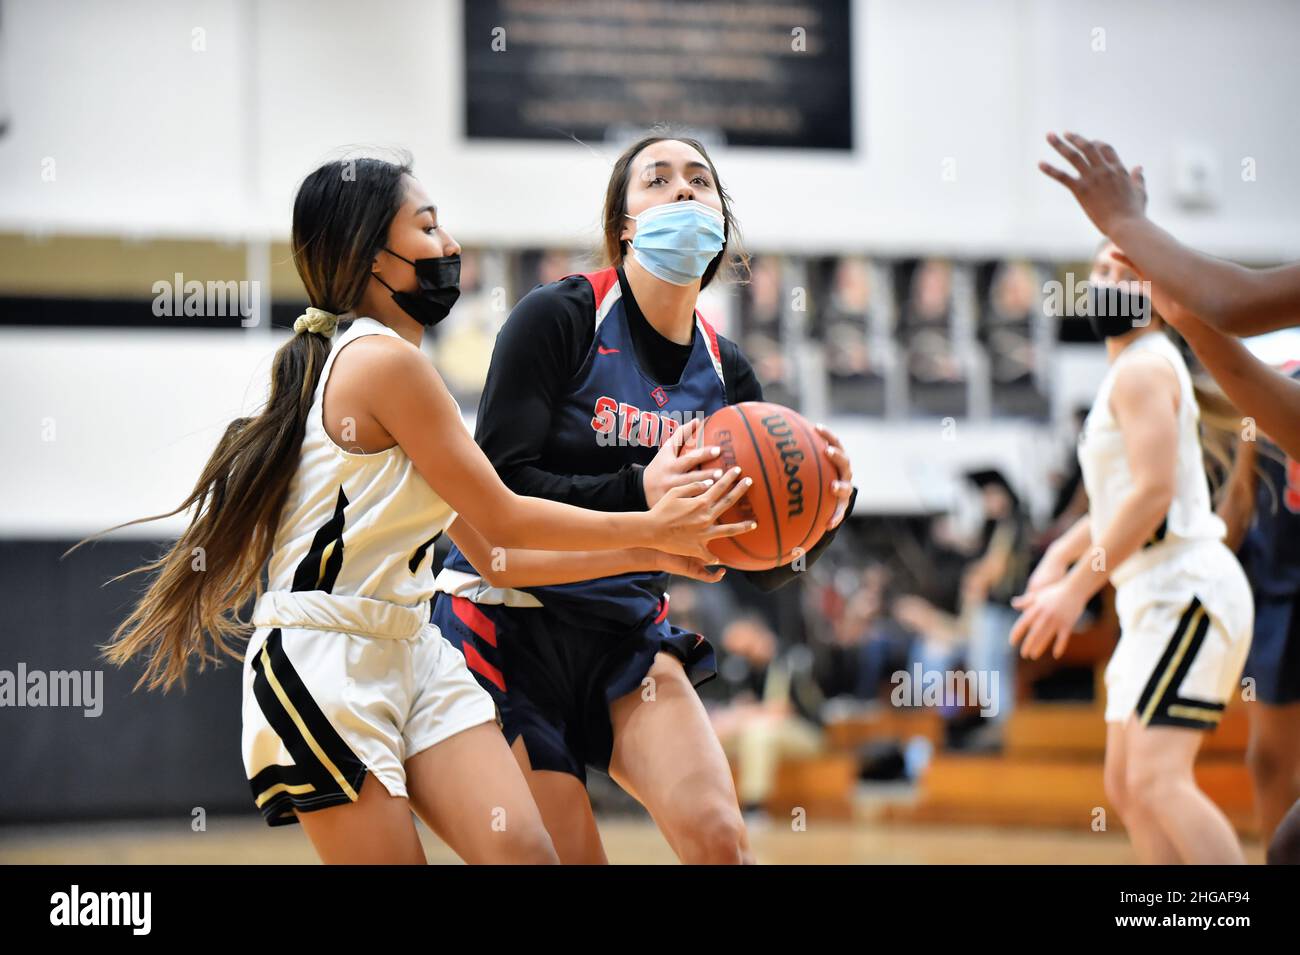 USA. After driving into the paint, a player encounters a defender who challenged her claim for possession of the ball. Stock Photo